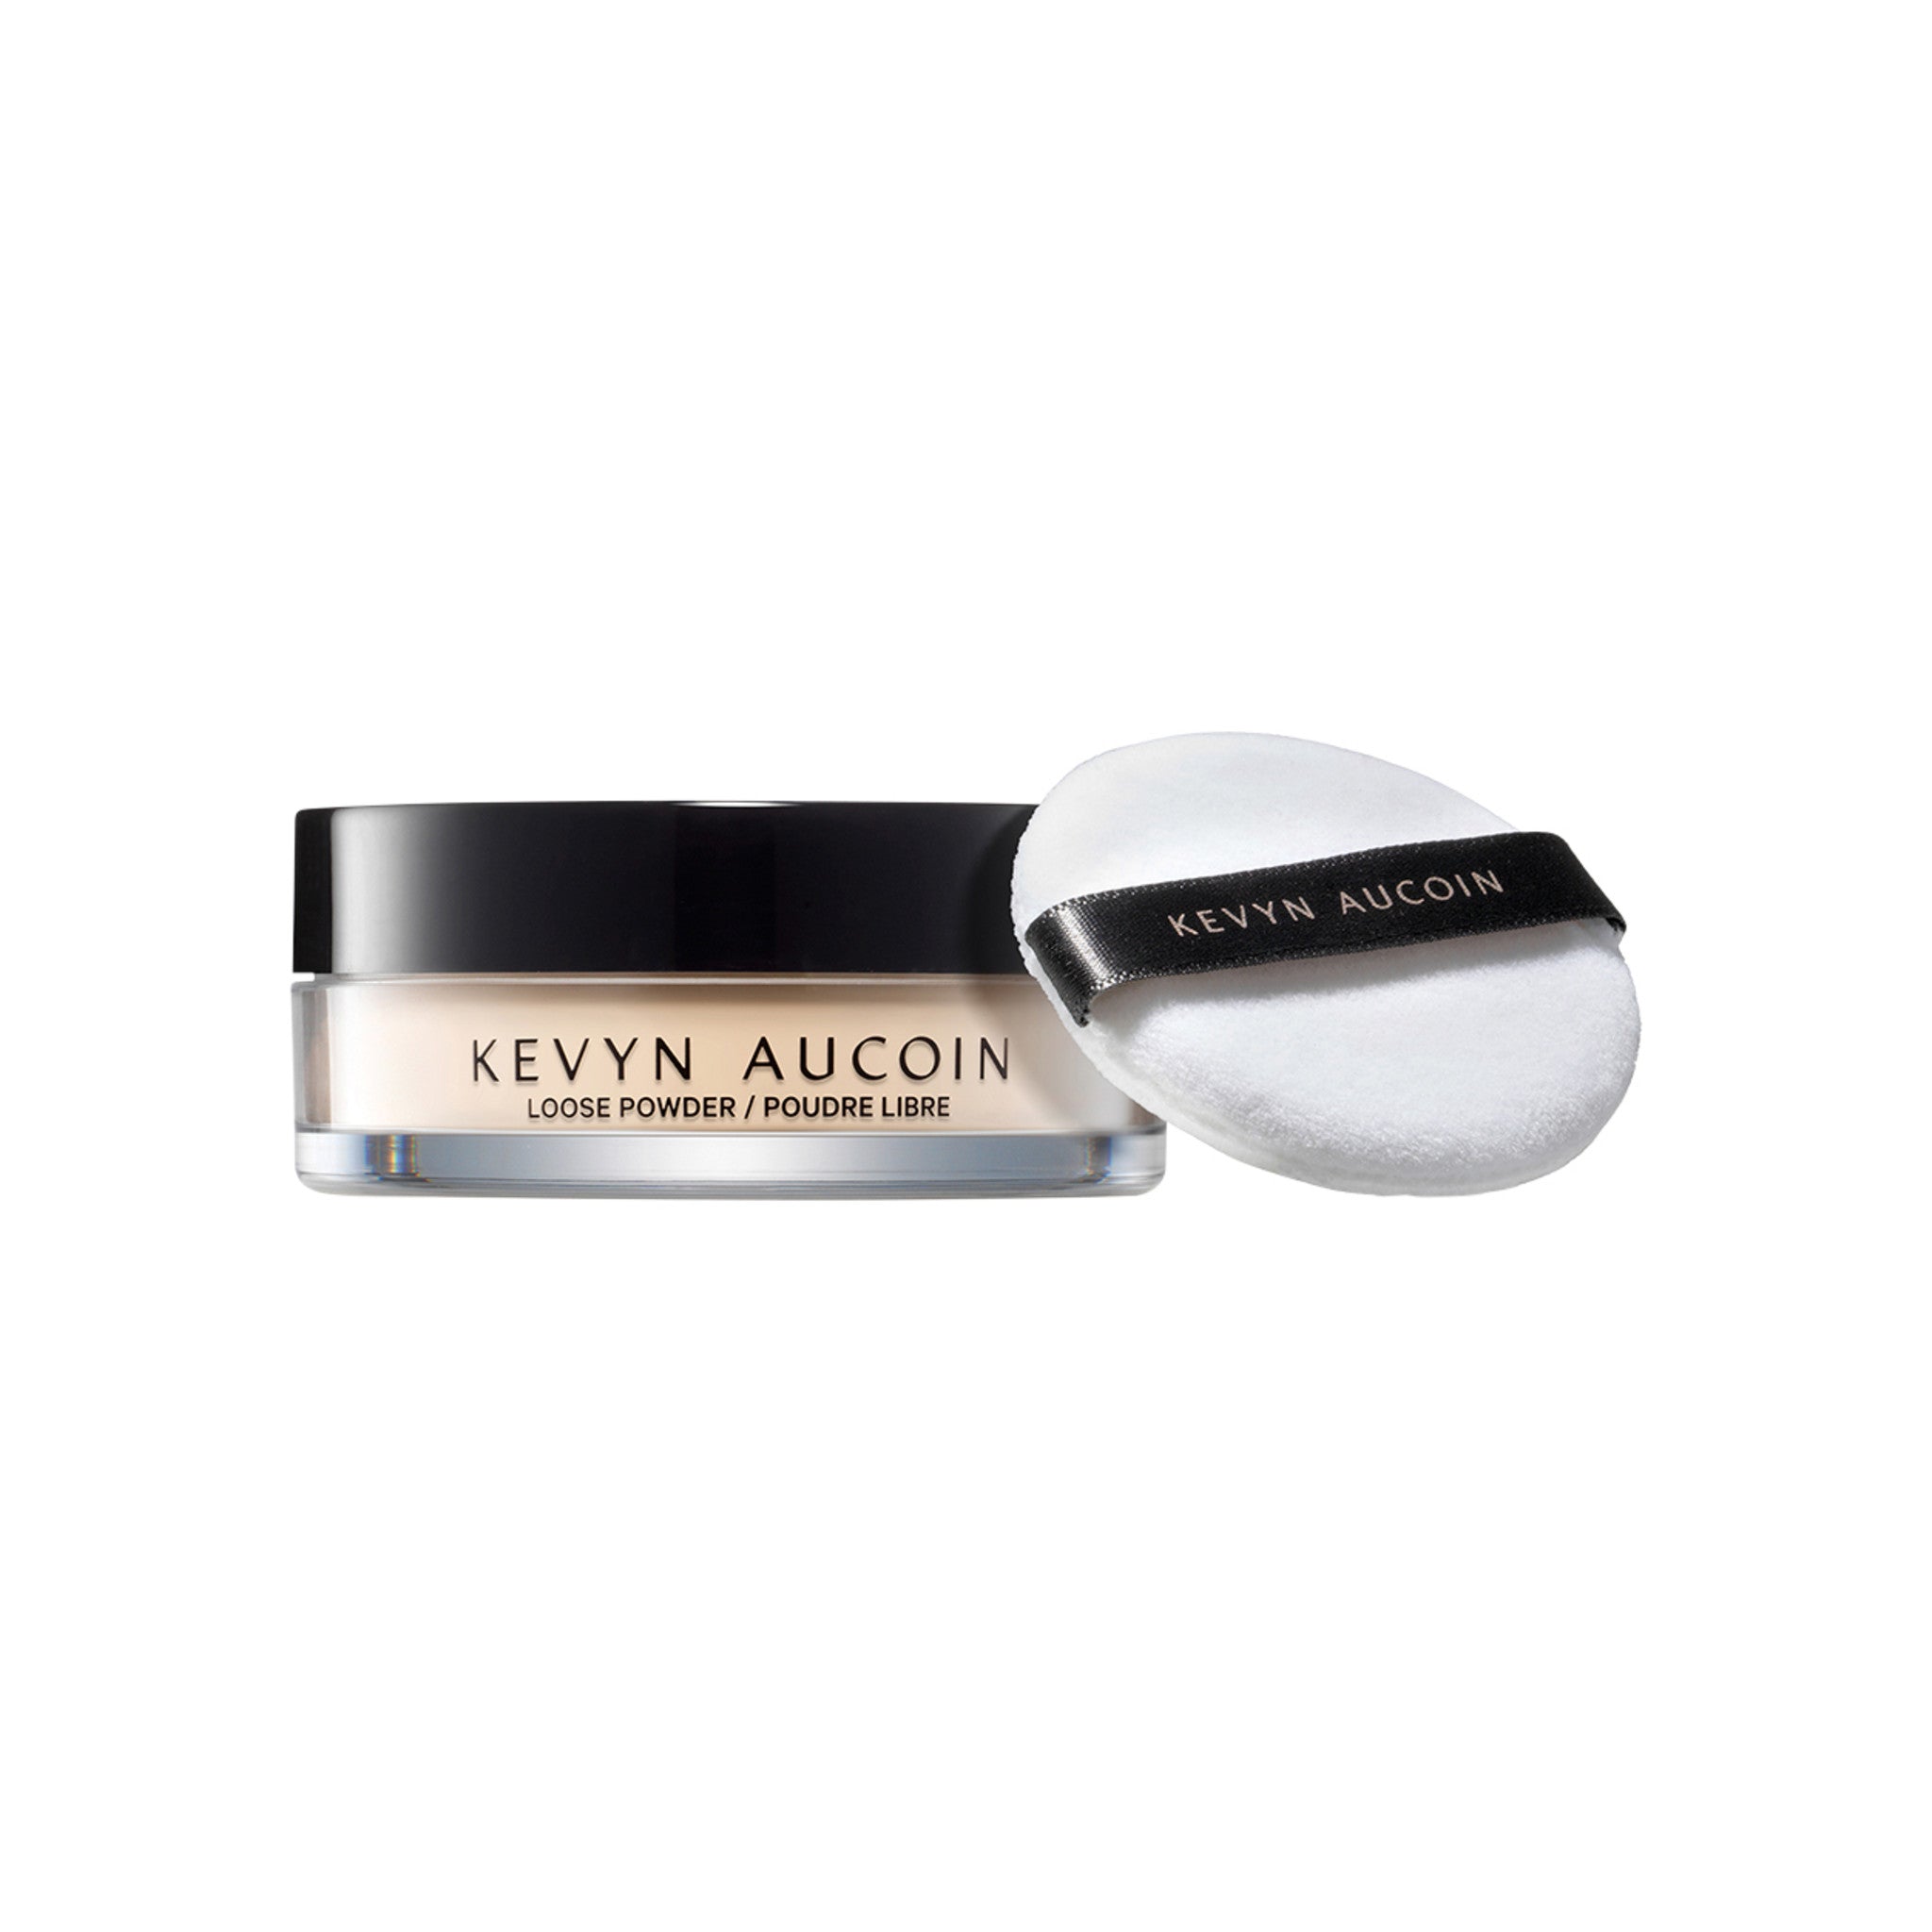 Kevyn Aucoin Loose Powder main image. This product is in the color nude, for all complexions